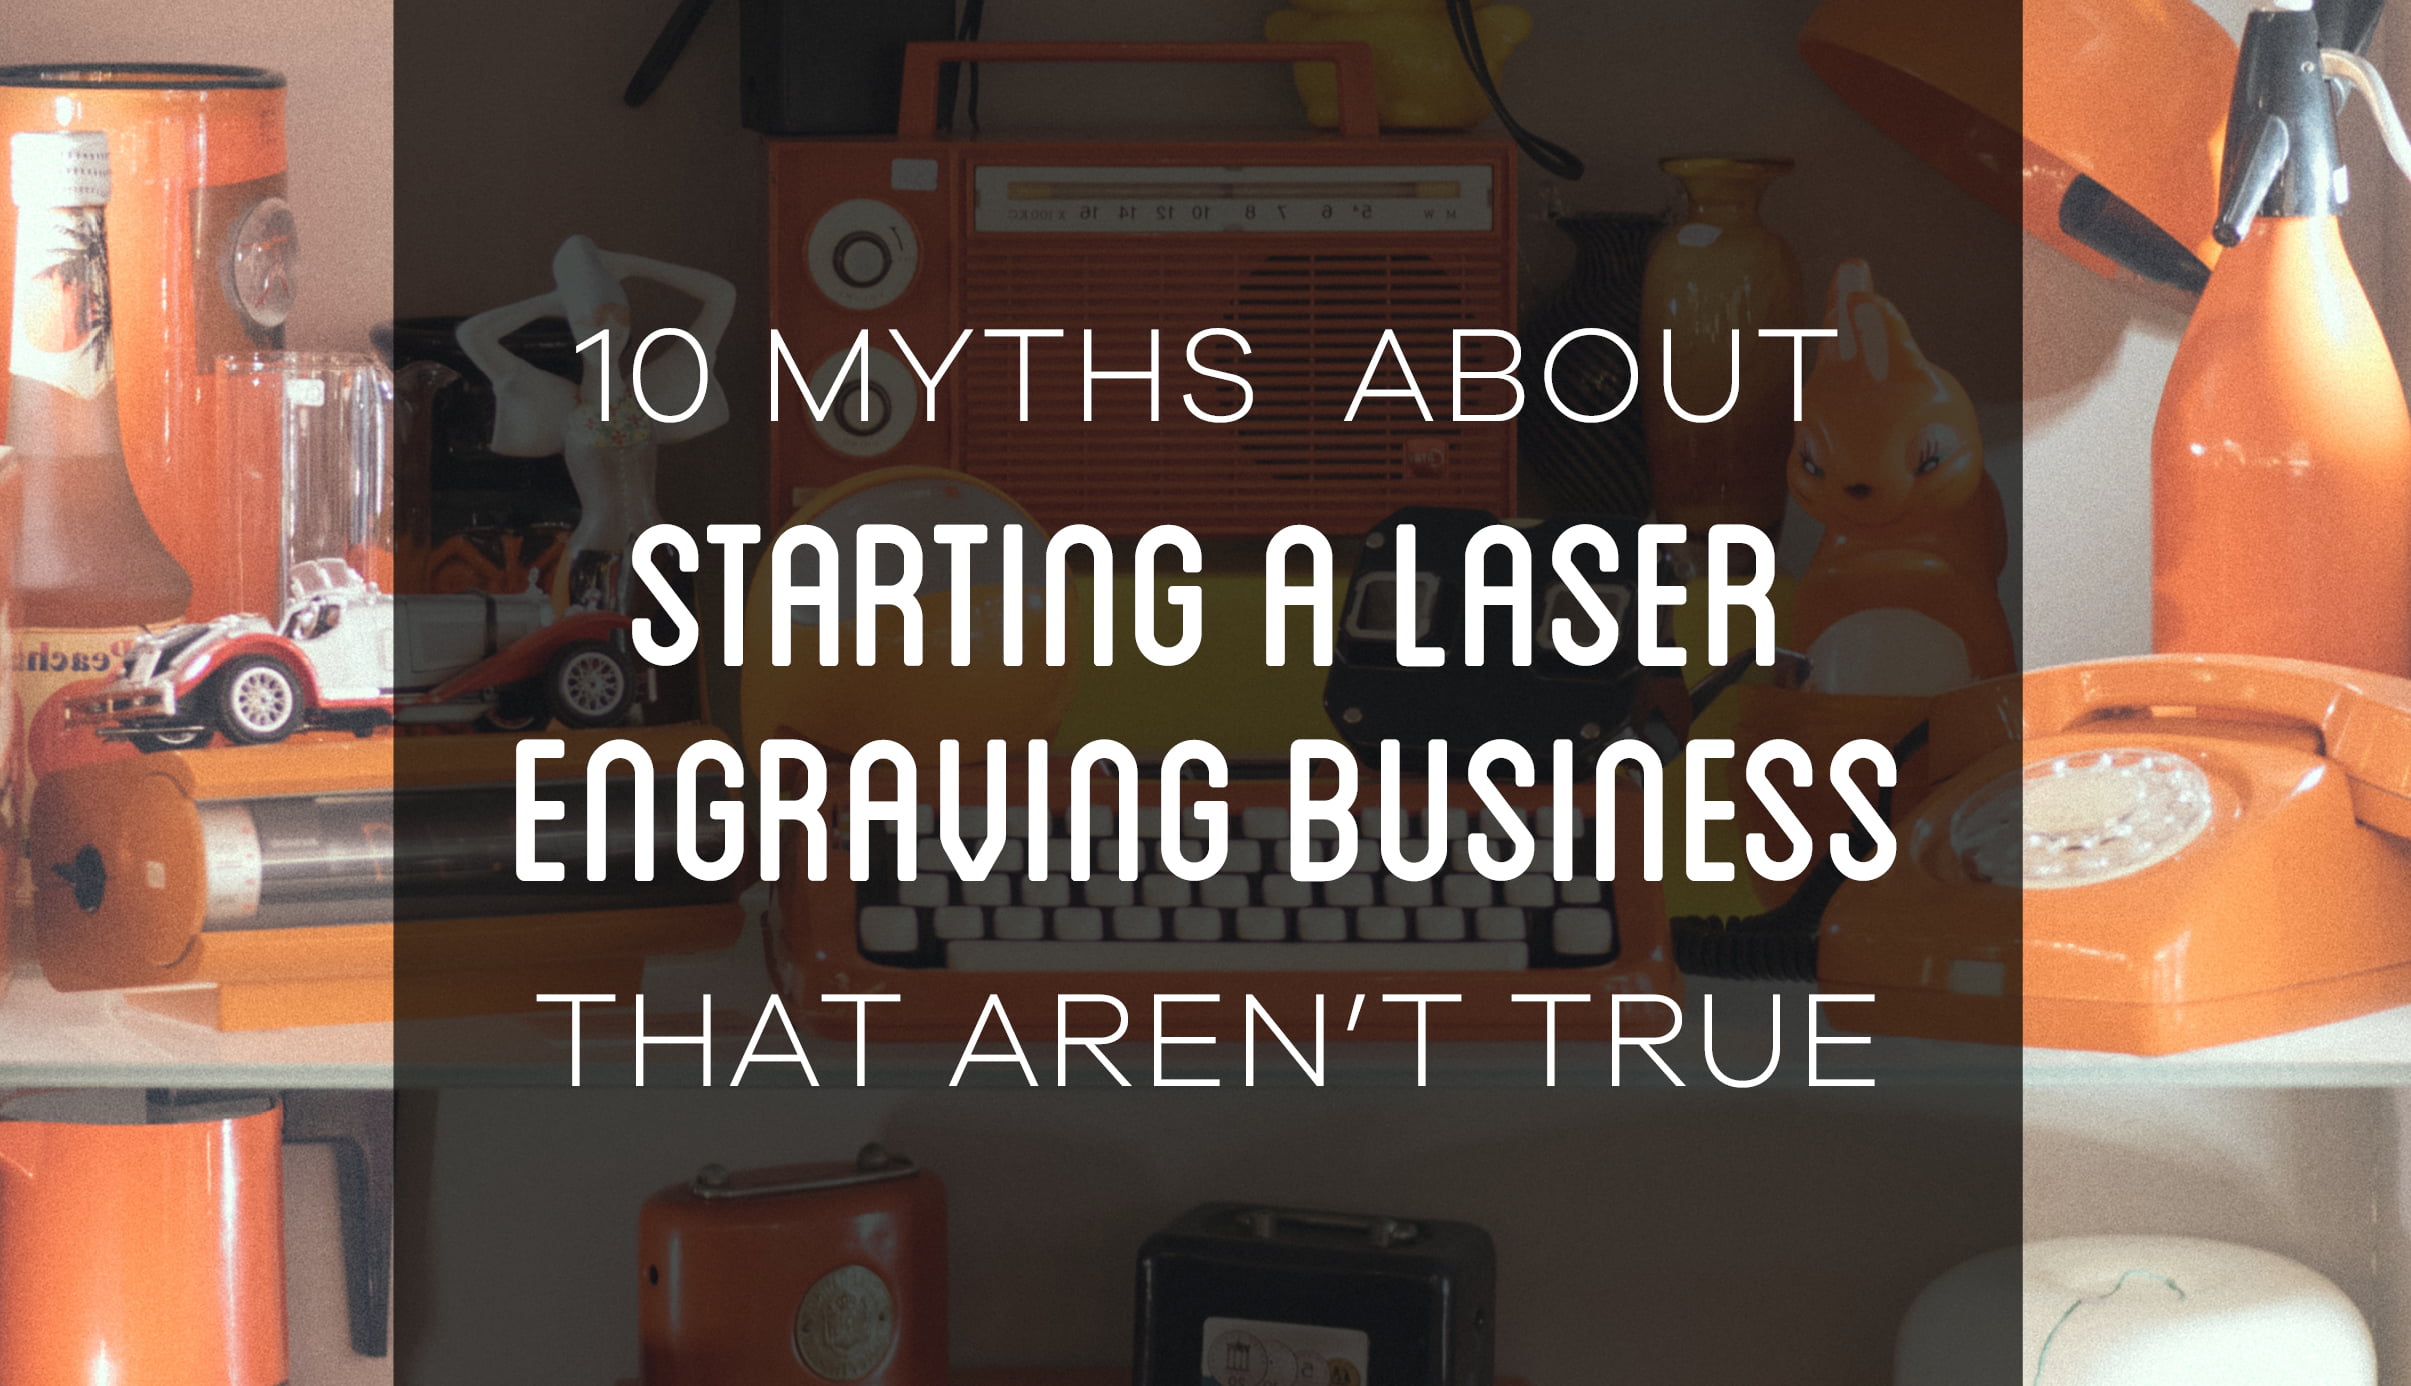 10 Myths About Starting a Laser Cutter & Engraving Business That Aren’t True